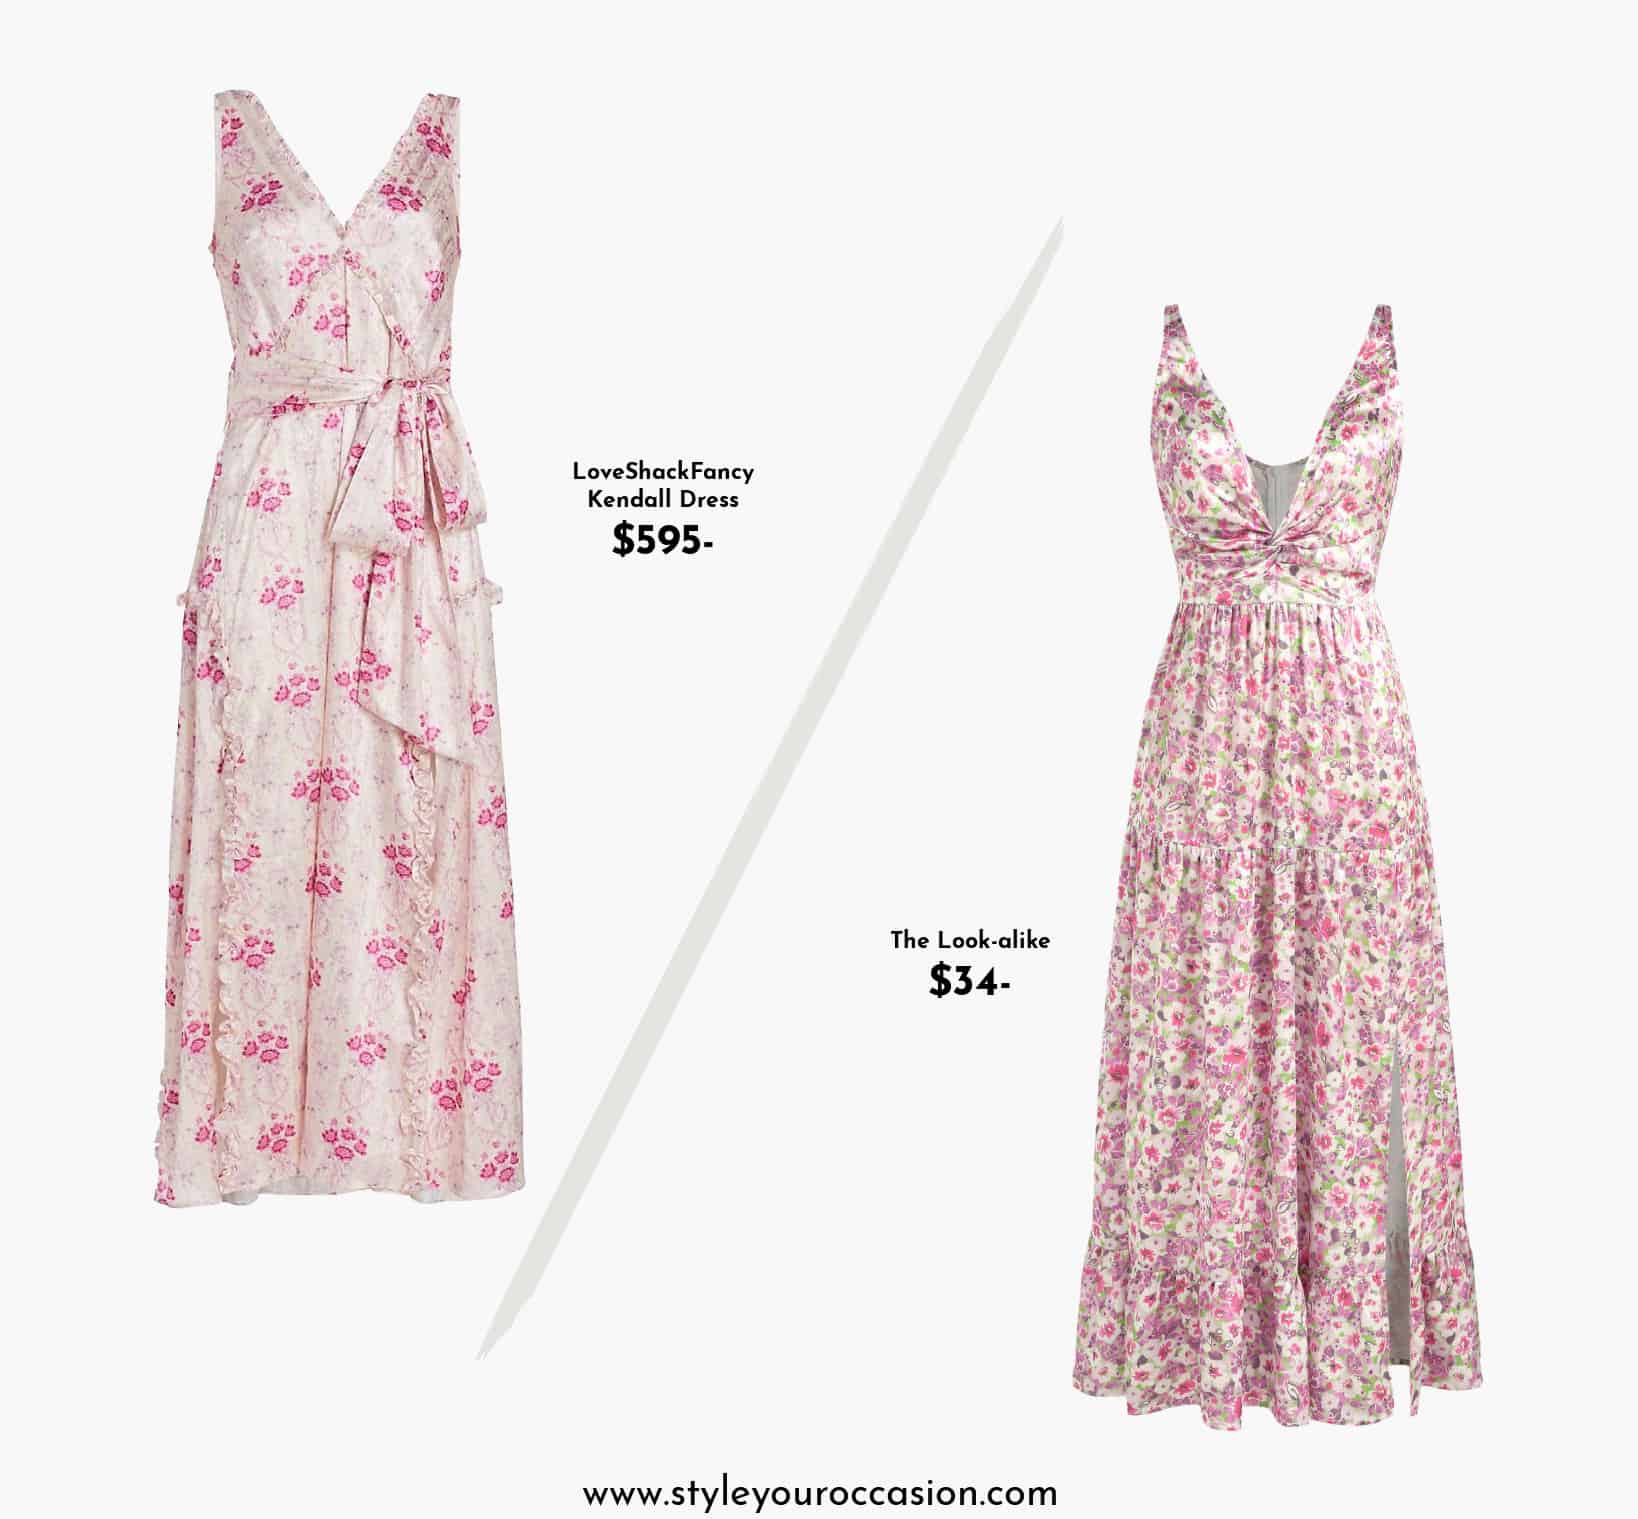 image of two pink floral silk maxi dresses that look alike